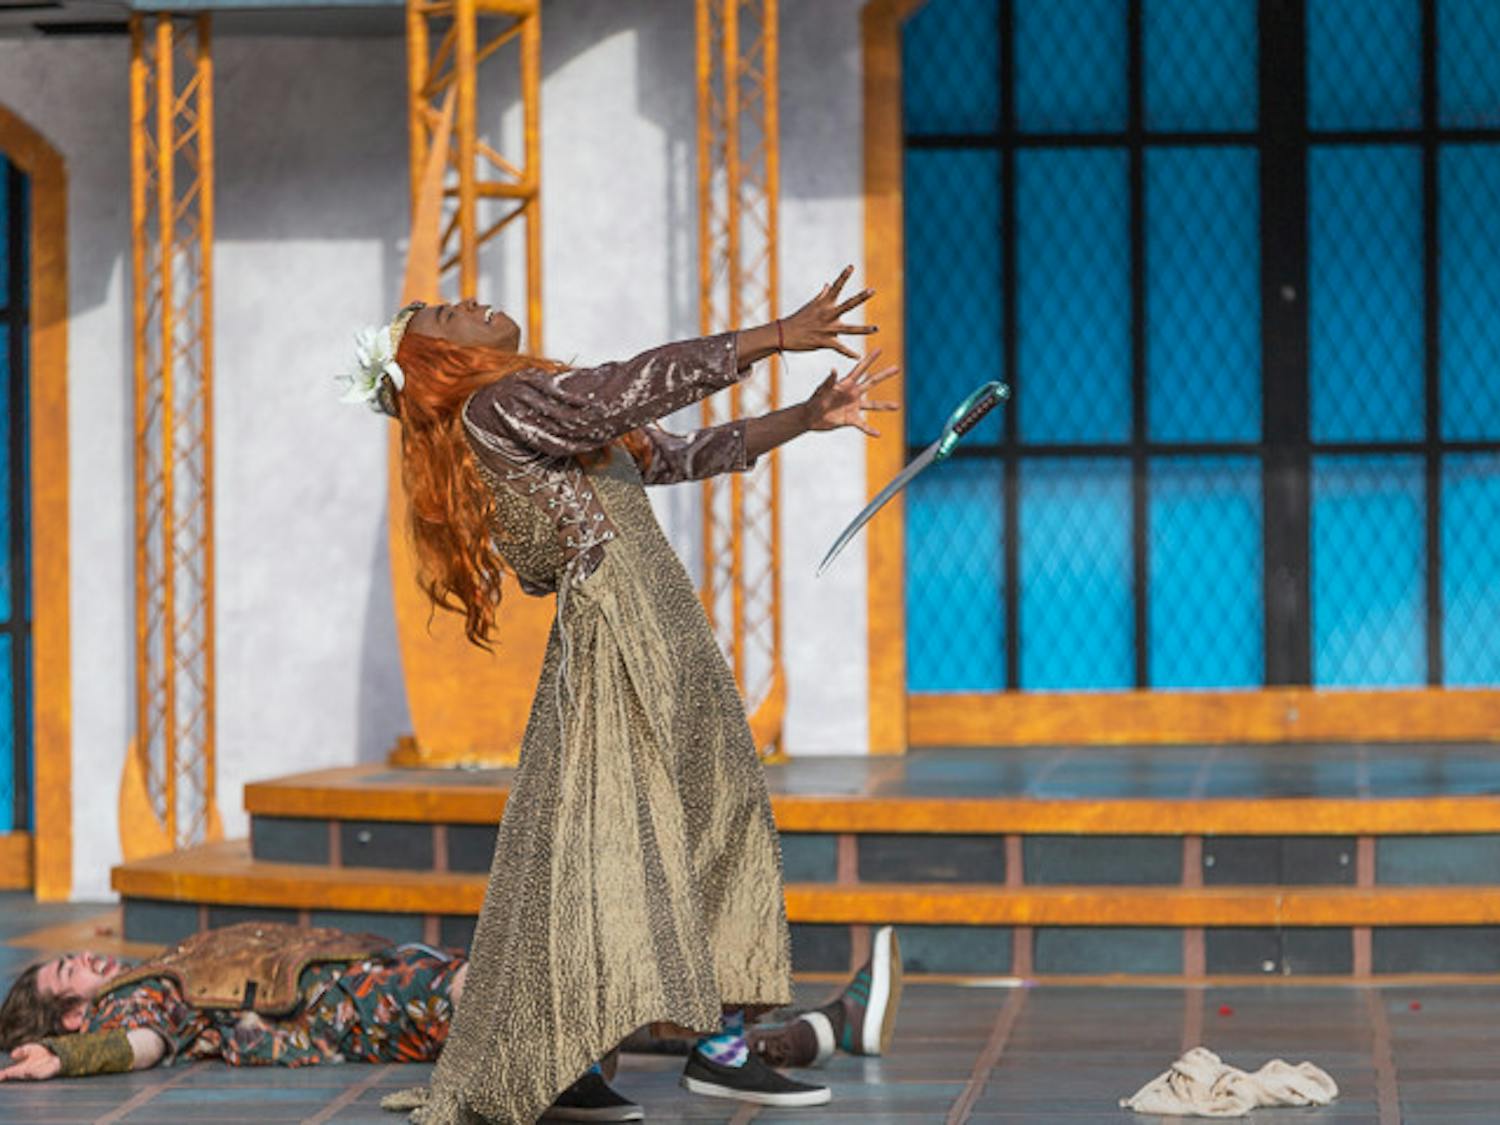 The character Flute, portrayed by second-year theatre student Phillip Parker acts out being fatally wounded by a sword during the final act of "A Midsummer Night's Dream" on Oct. 9, 2022. &nbsp;The character Flute is performing the tragedy of Pyramus and Thisbe to the Duke of Athens in this final scene of the play.